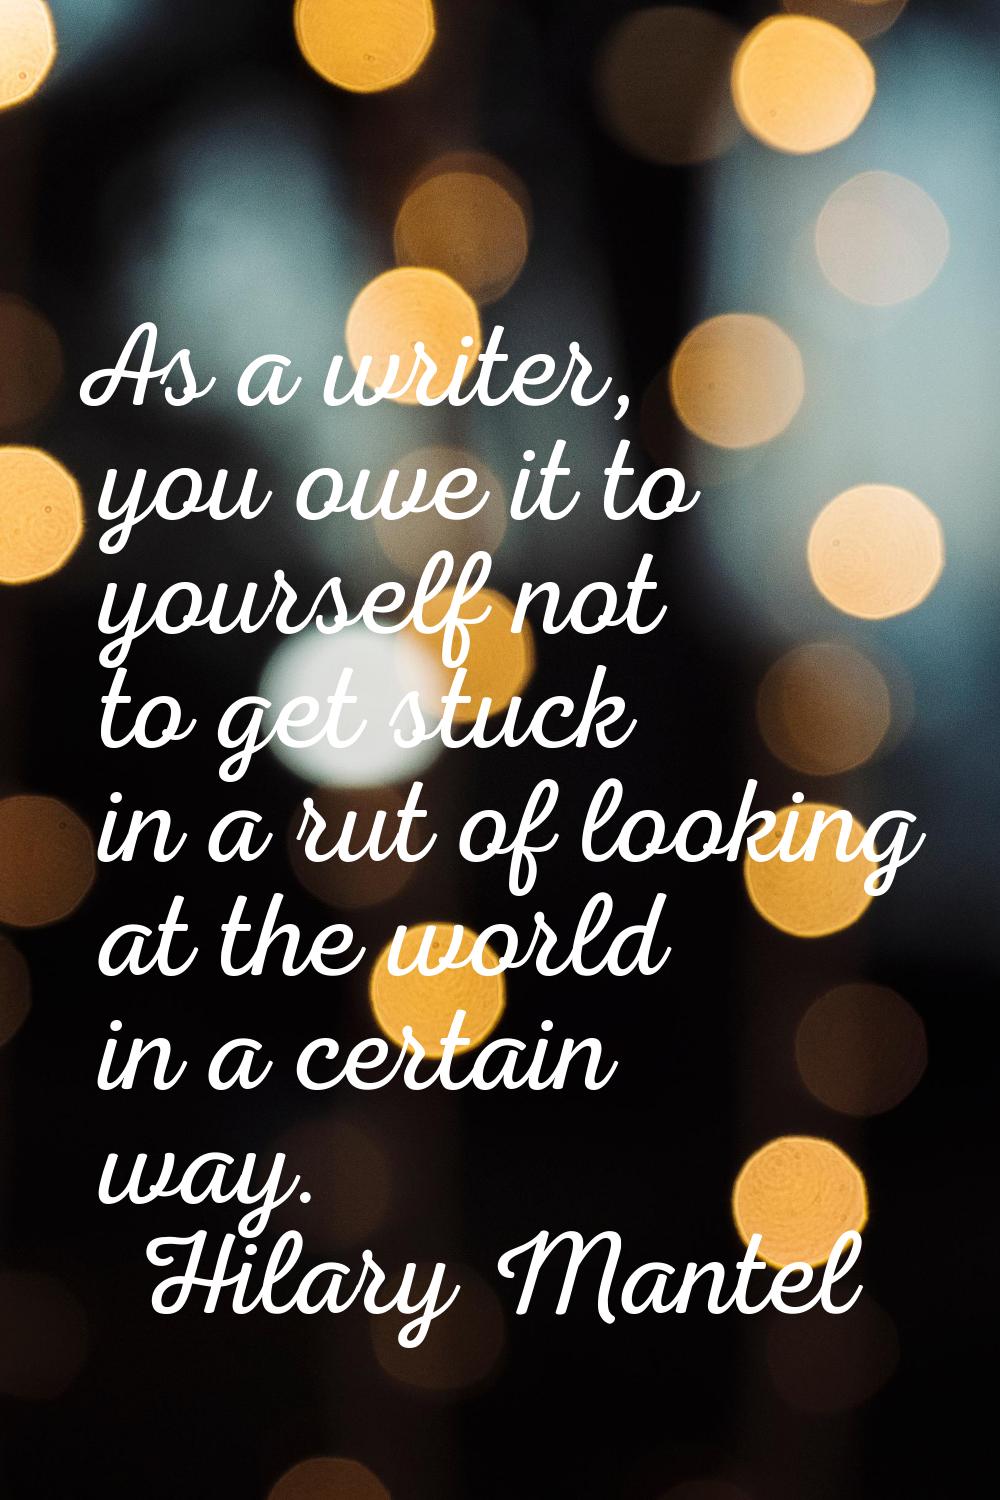 As a writer, you owe it to yourself not to get stuck in a rut of looking at the world in a certain 